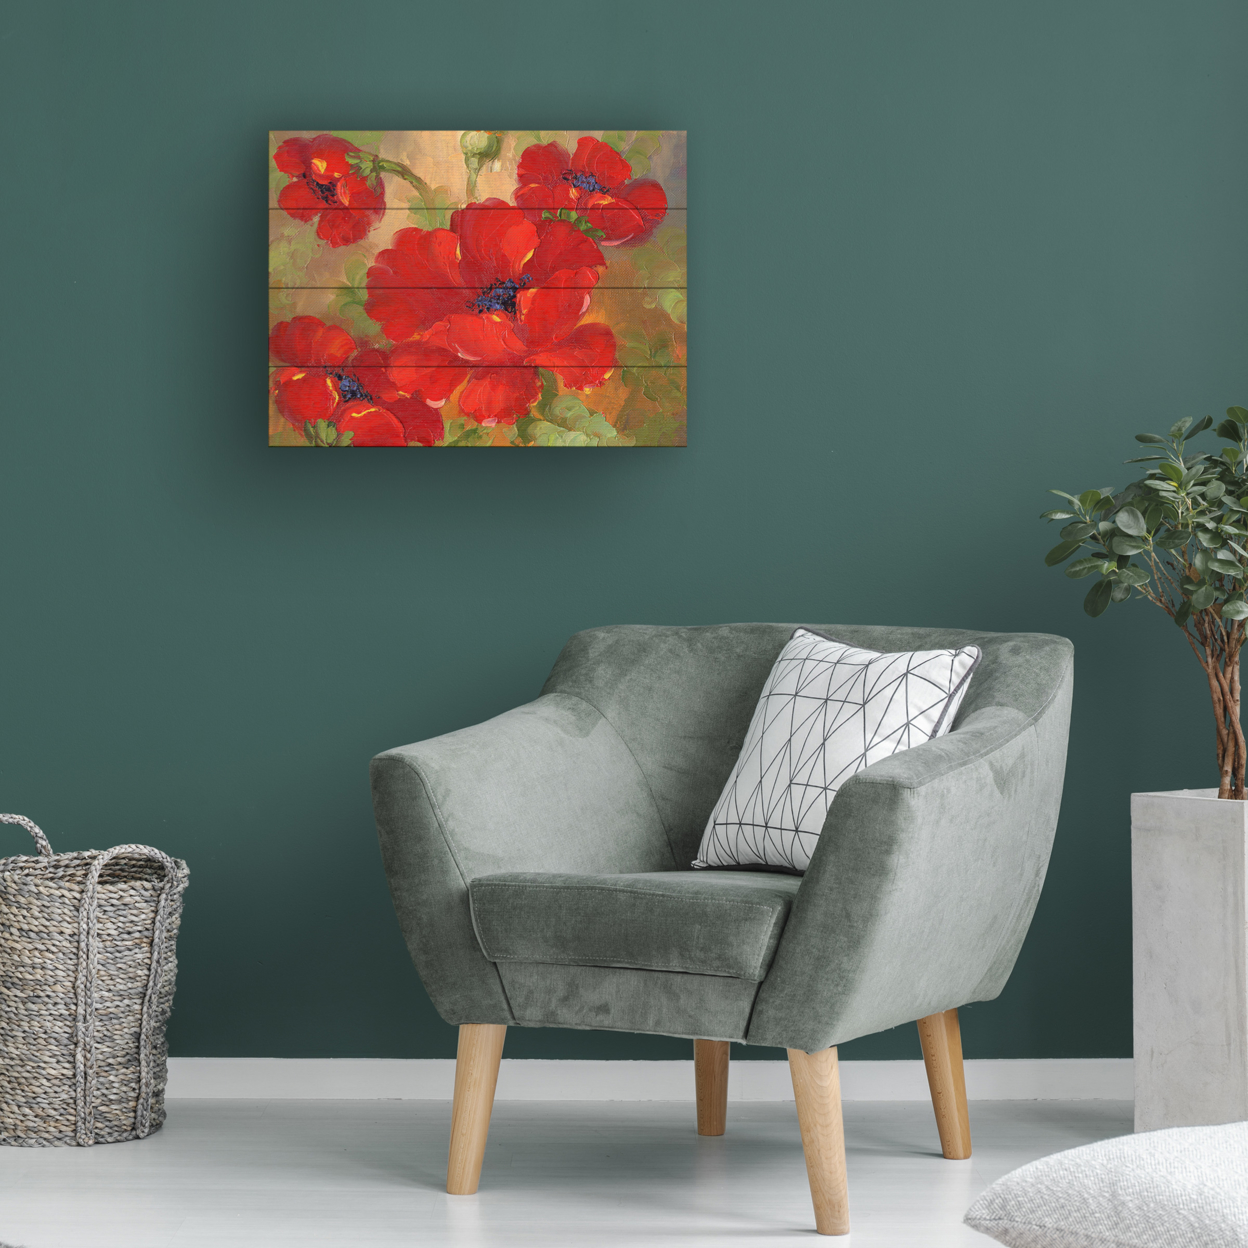 Wall Art 12 X 16 Inches Titled Poppies Ready To Hang Printed On Wooden Planks